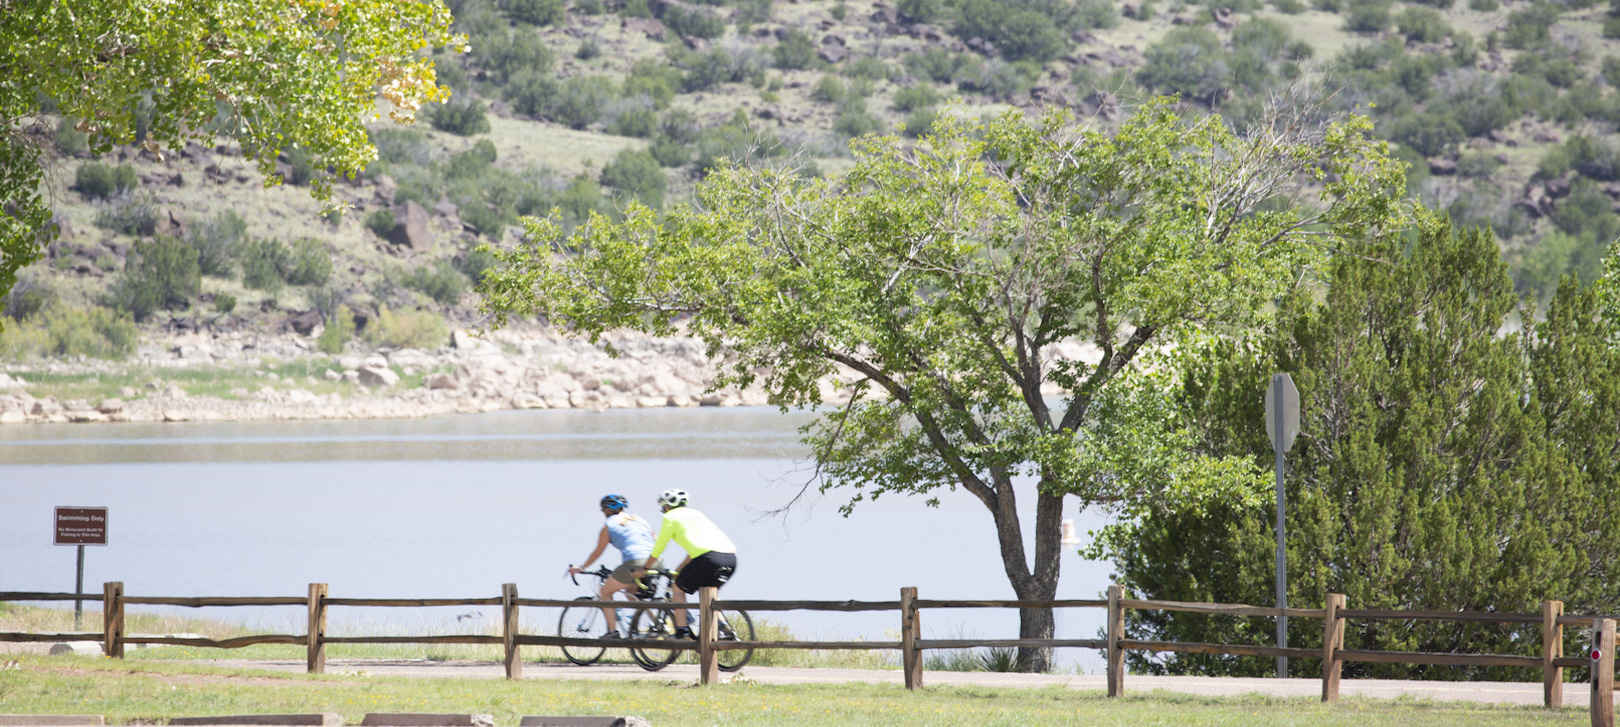 Two cyclists ride on a path along the lake